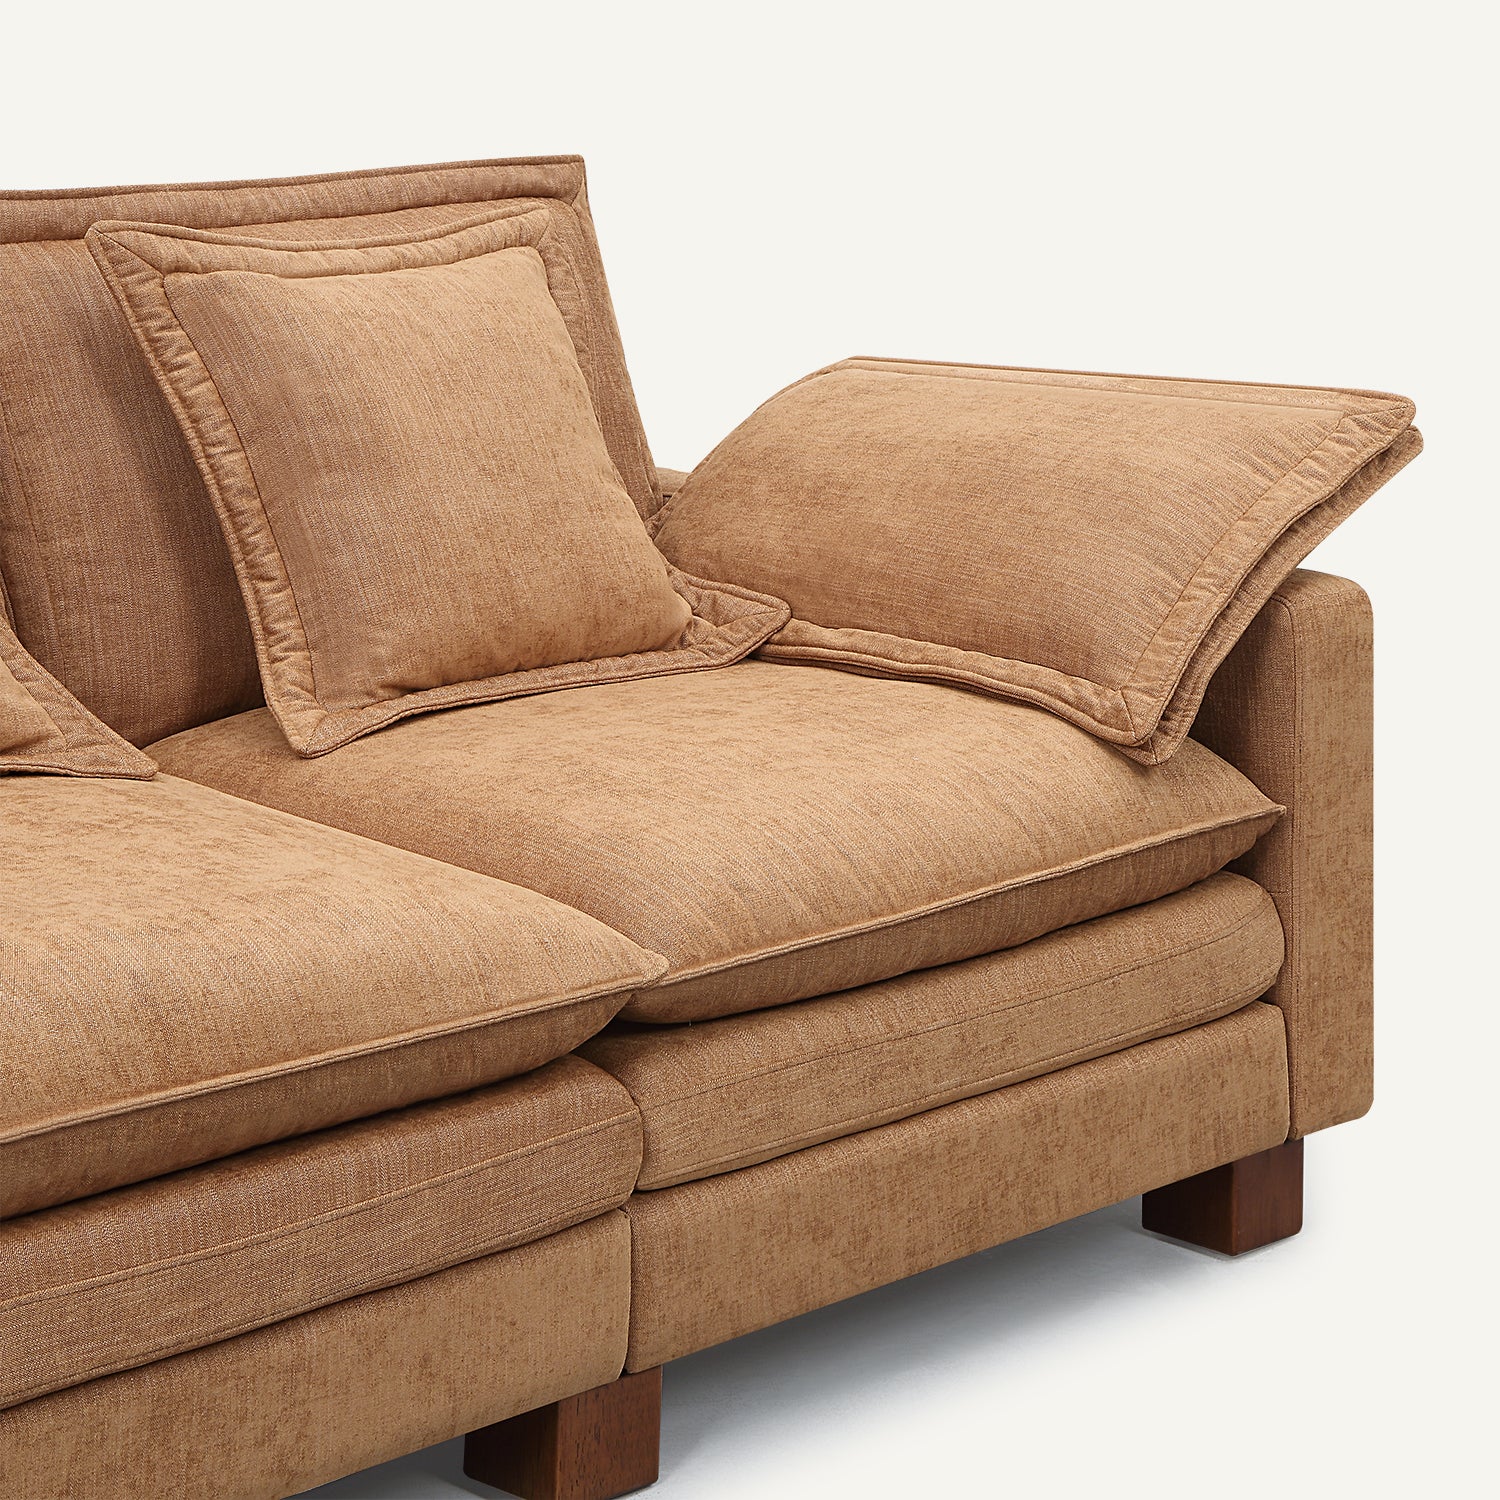 Stacked Tan Linen Loveseat with Ottoman